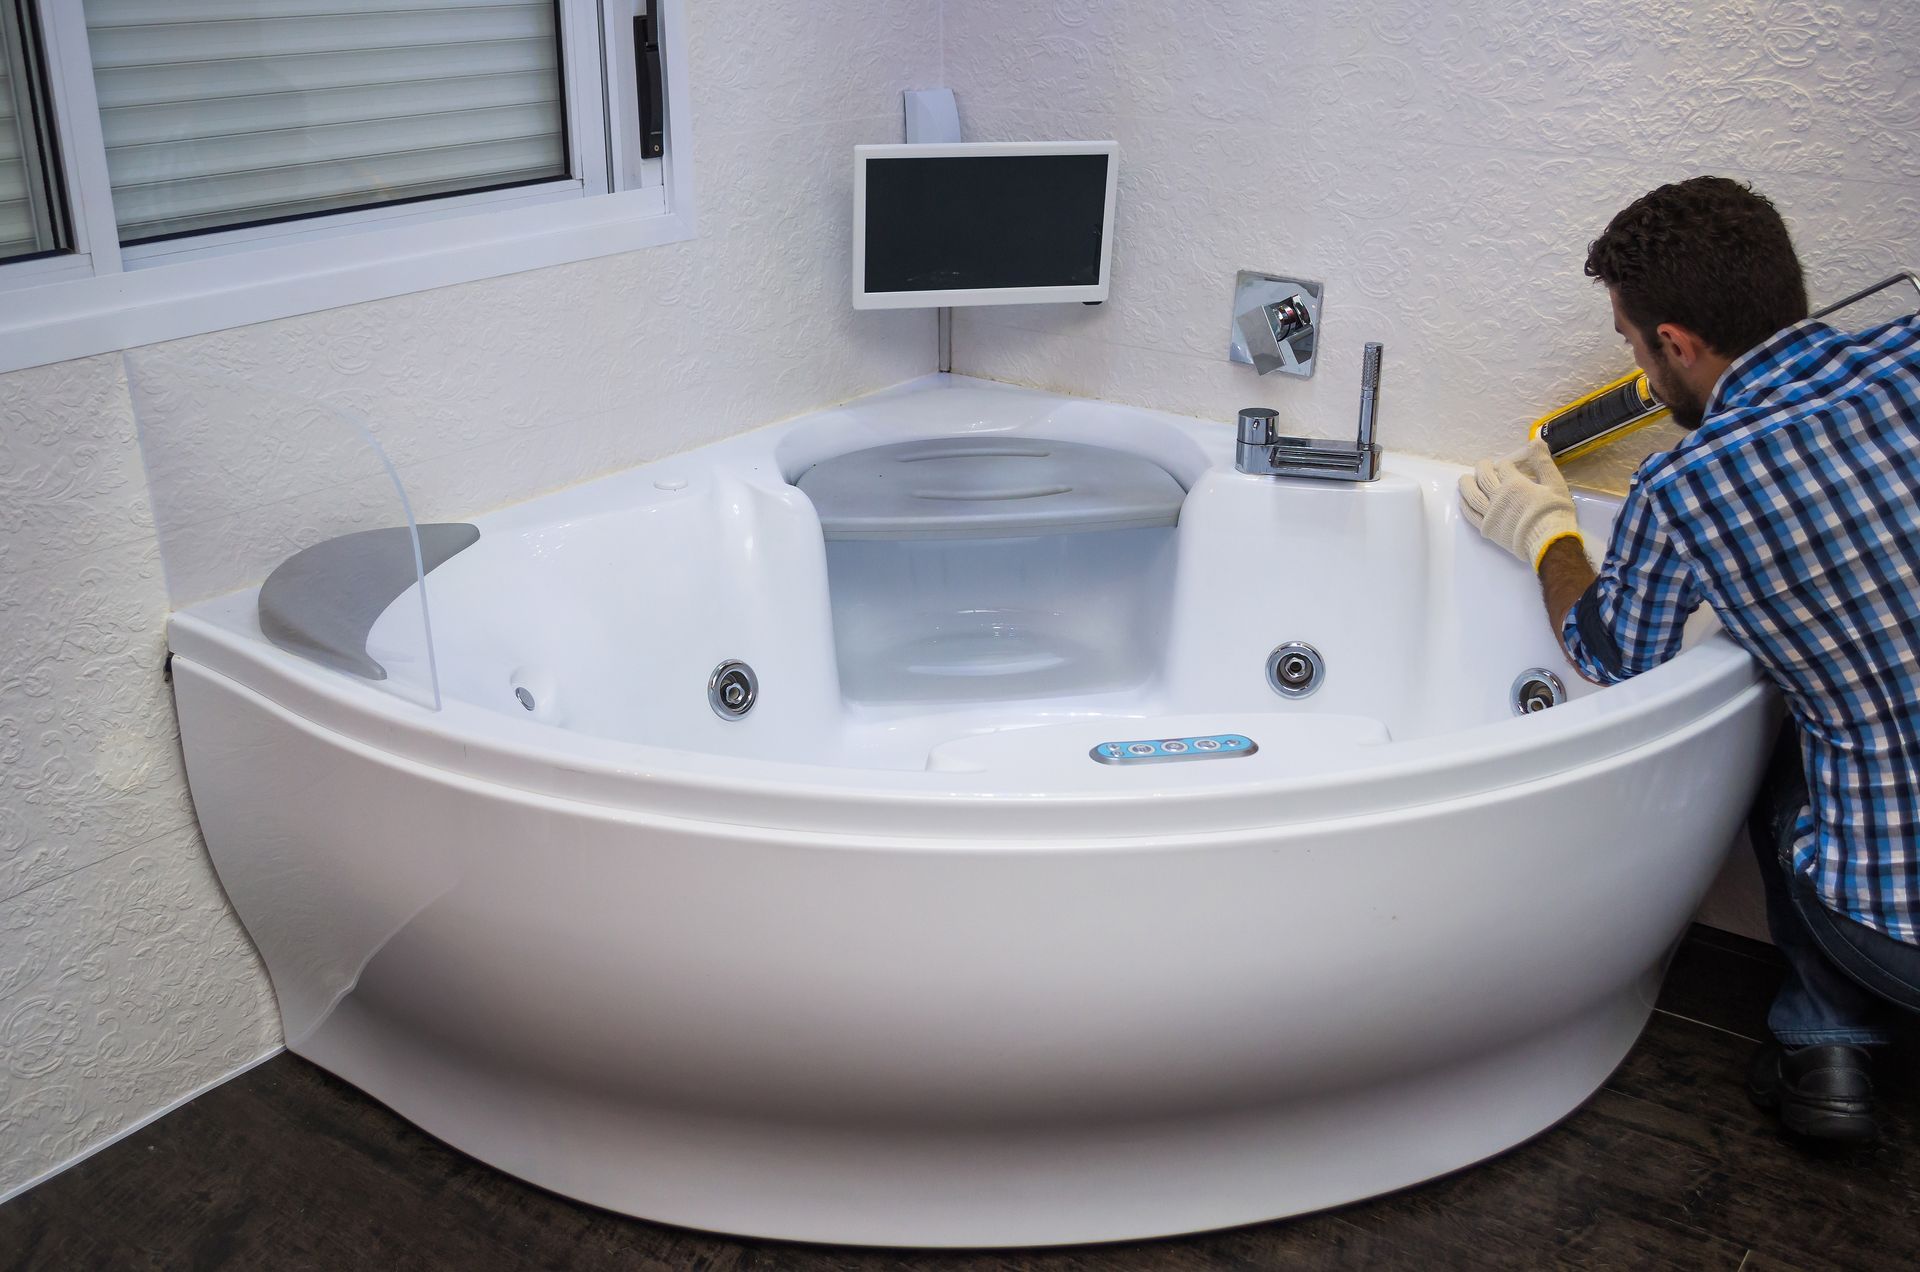 Contemporary hot tub installation featuring a built-in TV, with a person applying sealant for a secure setup.